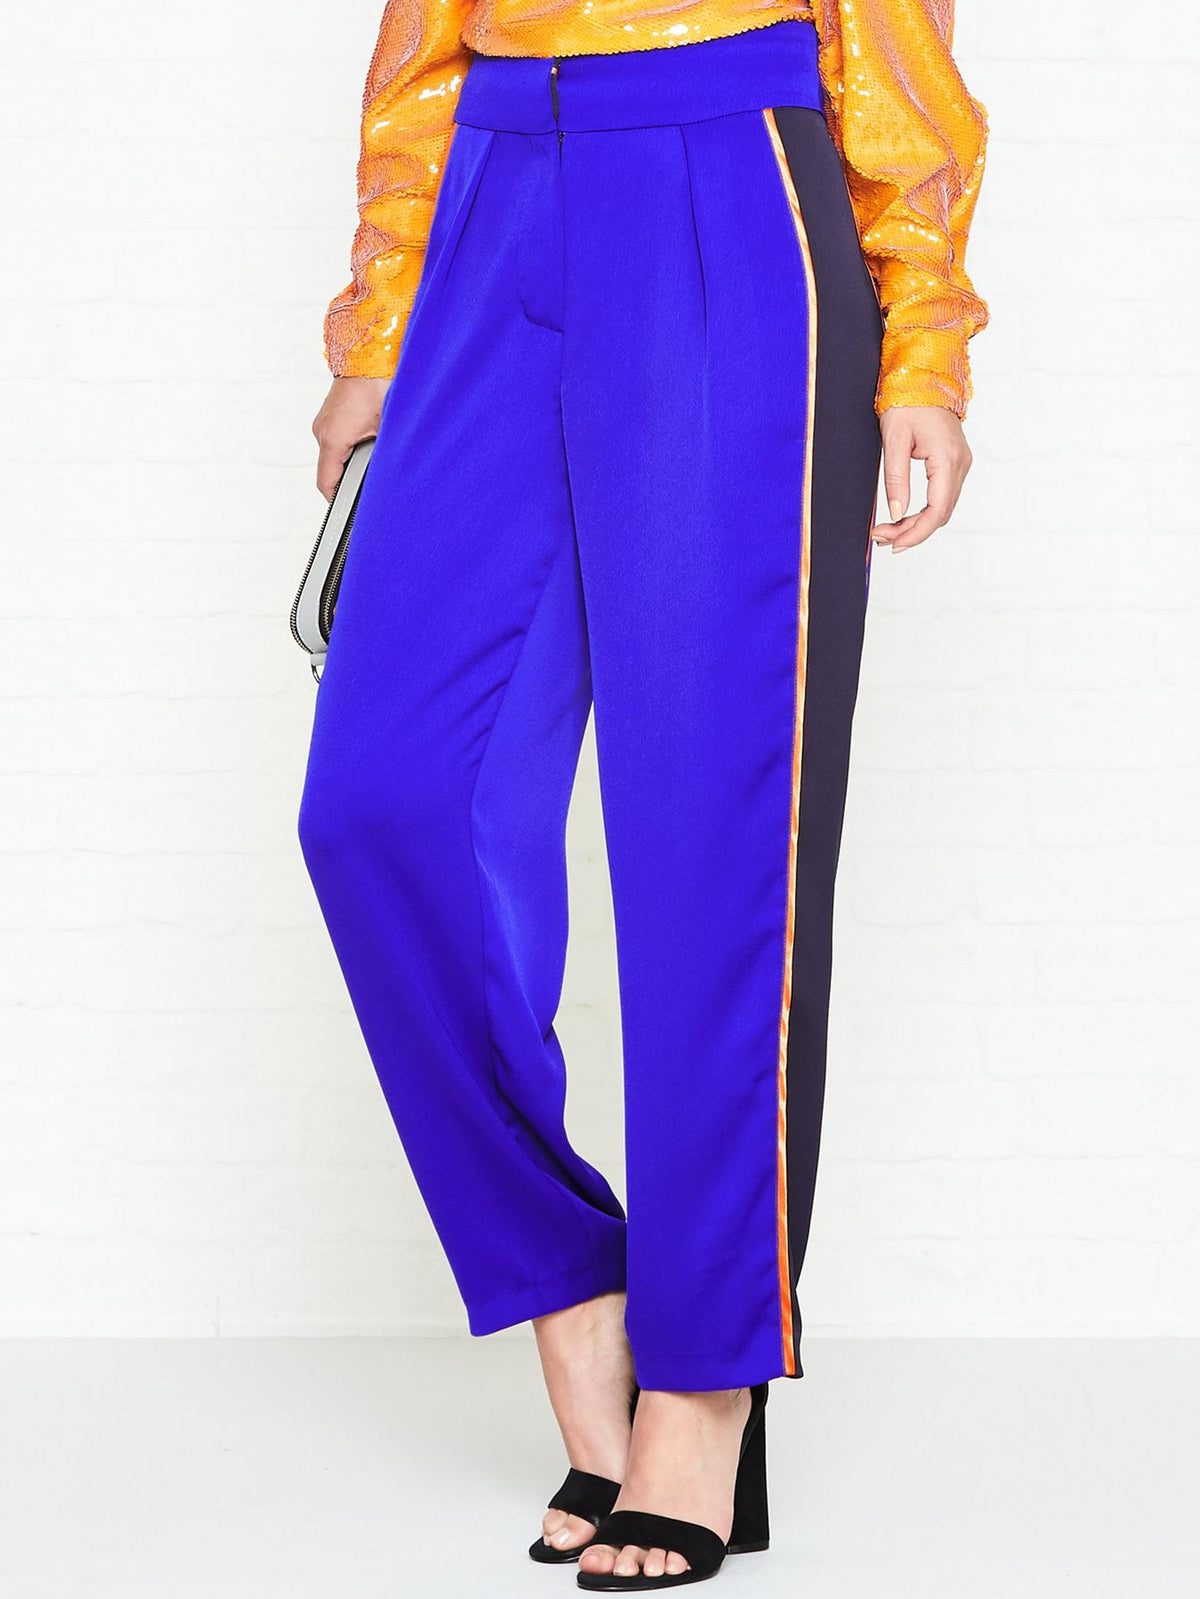 Womens Outline Lux Satin Jogger Bottoms in Cobalt